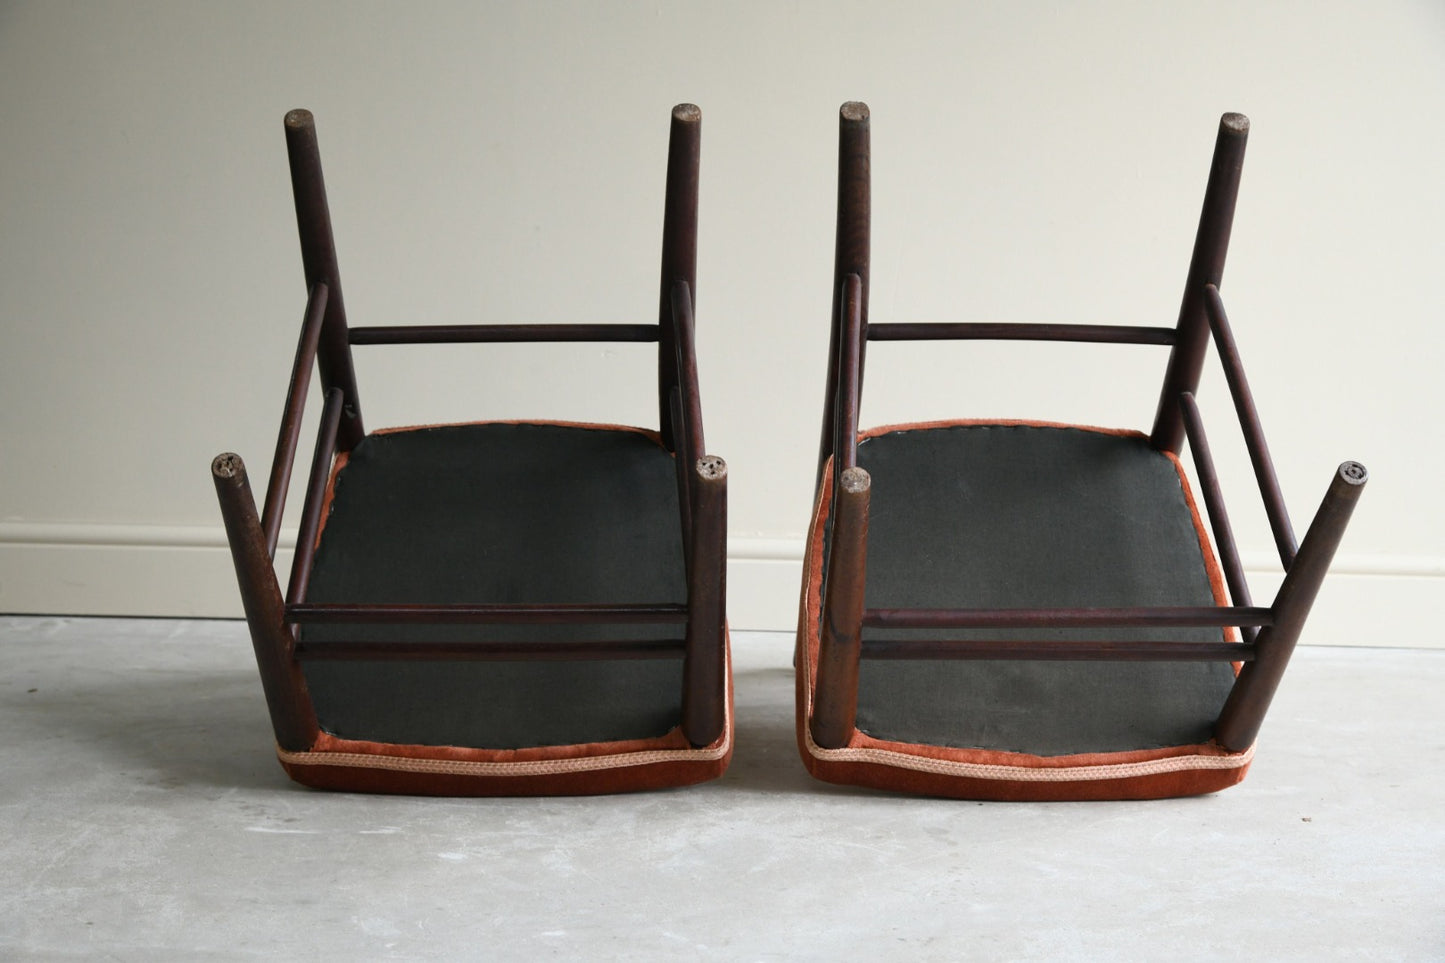 Pair Morris & Co Style Occasional Chairs